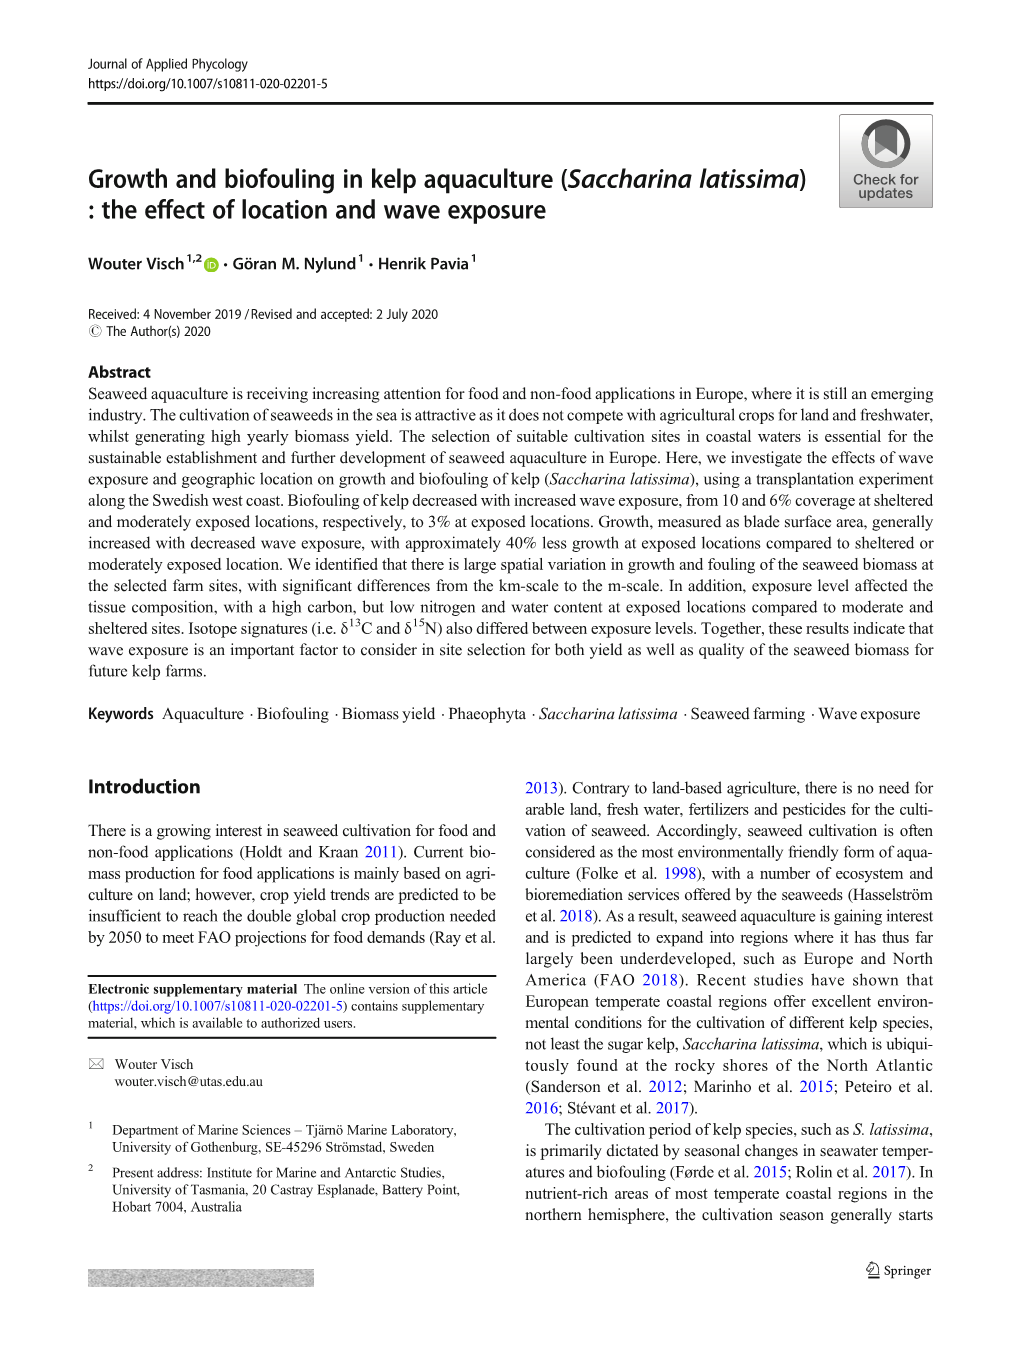 Growth and Biofouling in Kelp Aquaculture (Saccharina Latissima) : the Effect of Location and Wave Exposure